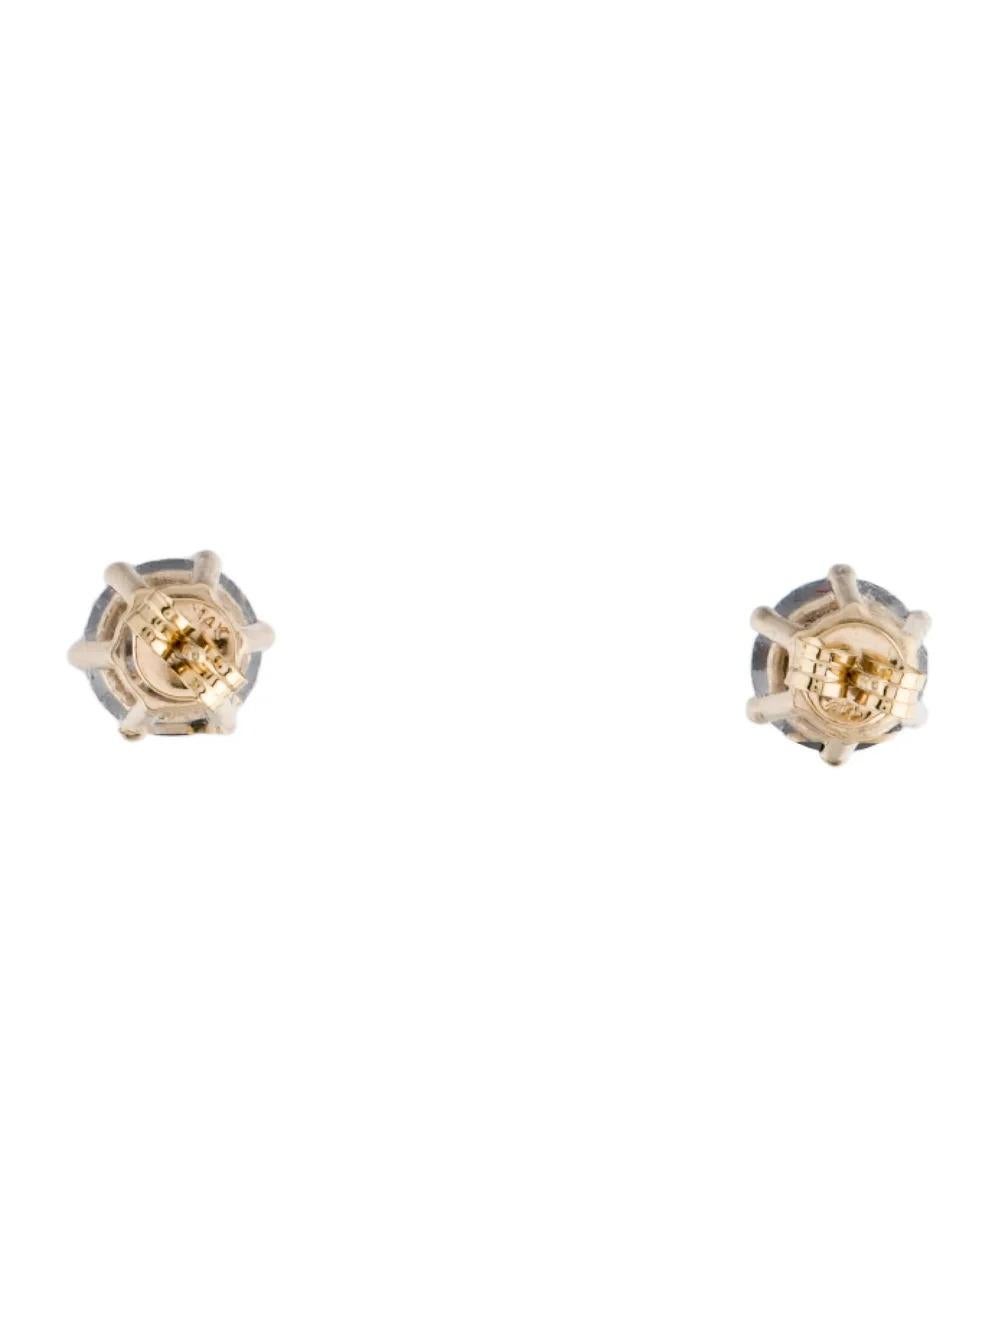 14K 5.07ctw Diamond Stud Earrings - Timeless Elegance, Brilliant Sparkle In New Condition For Sale In Holtsville, NY